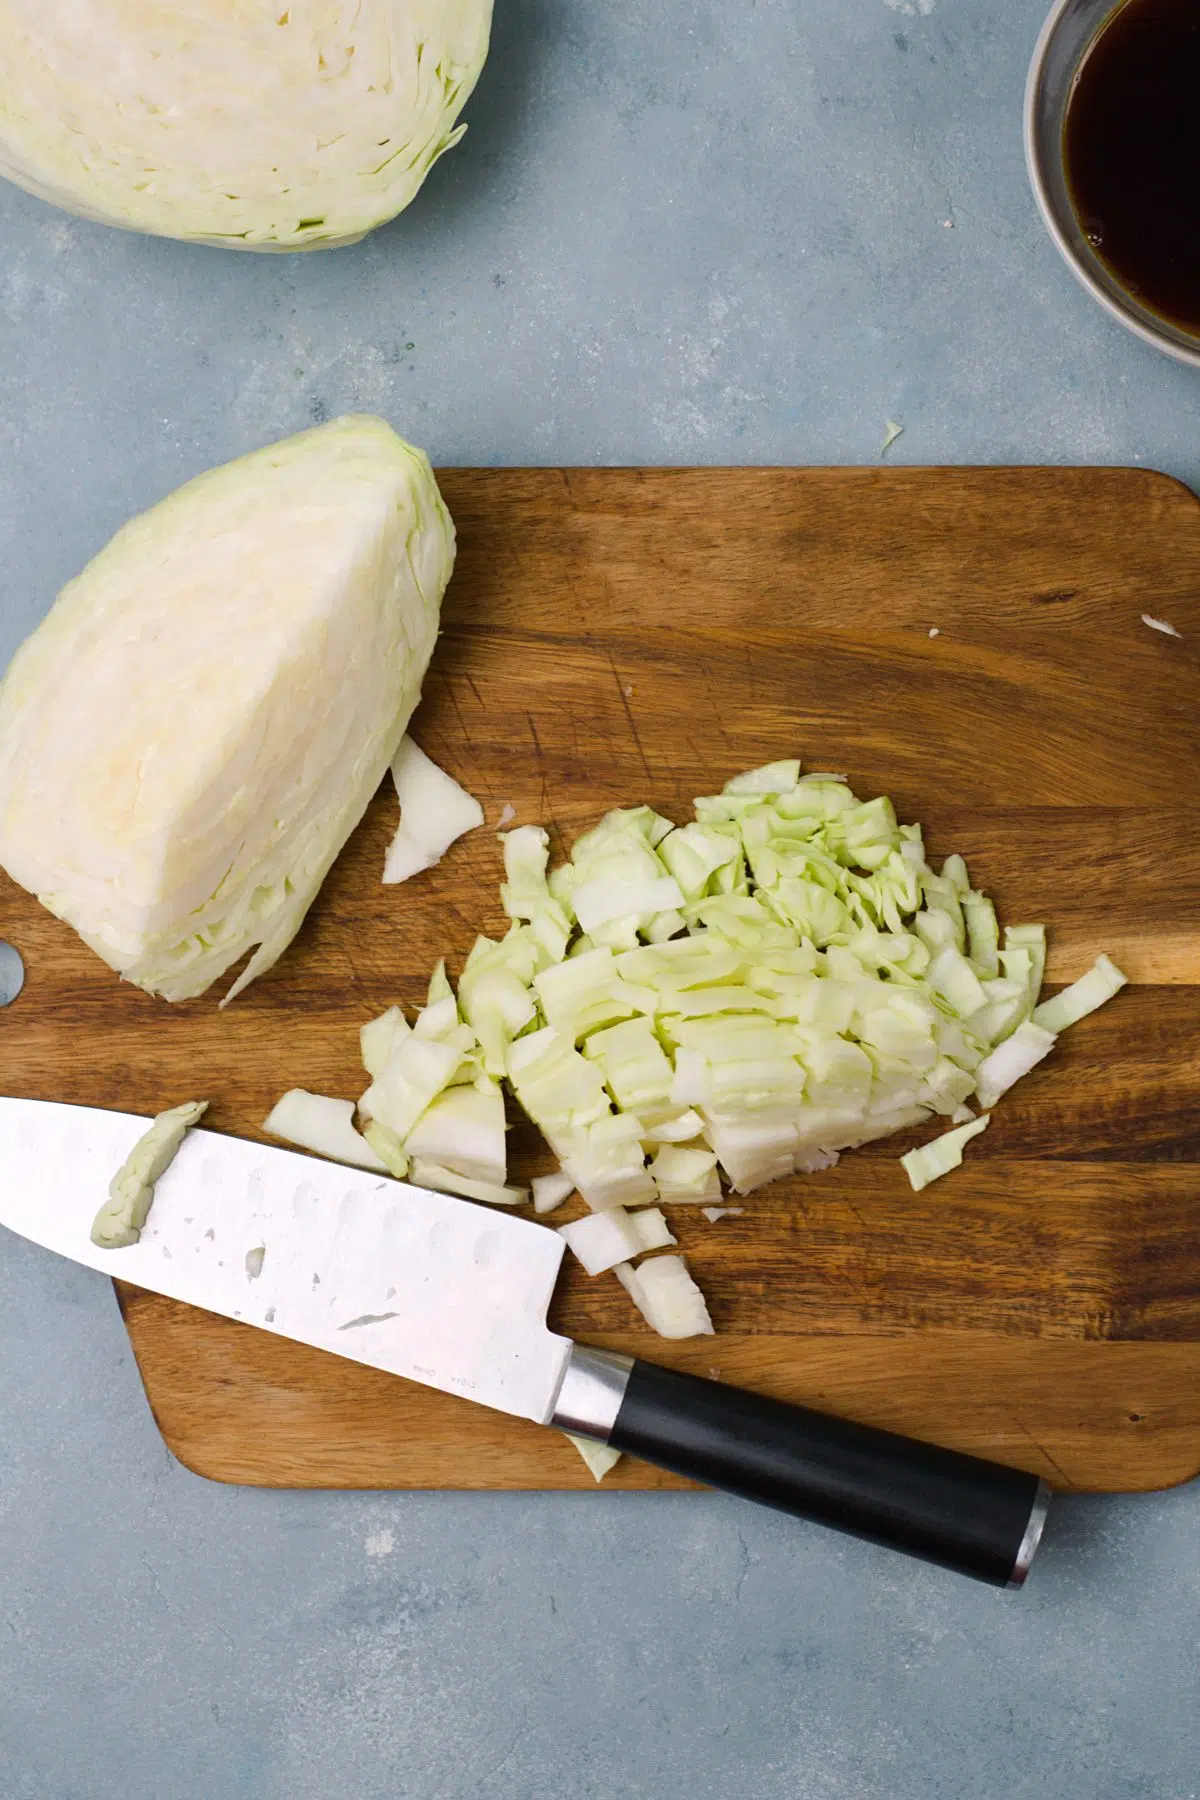 One fourth of white cabbage scut into small pieces